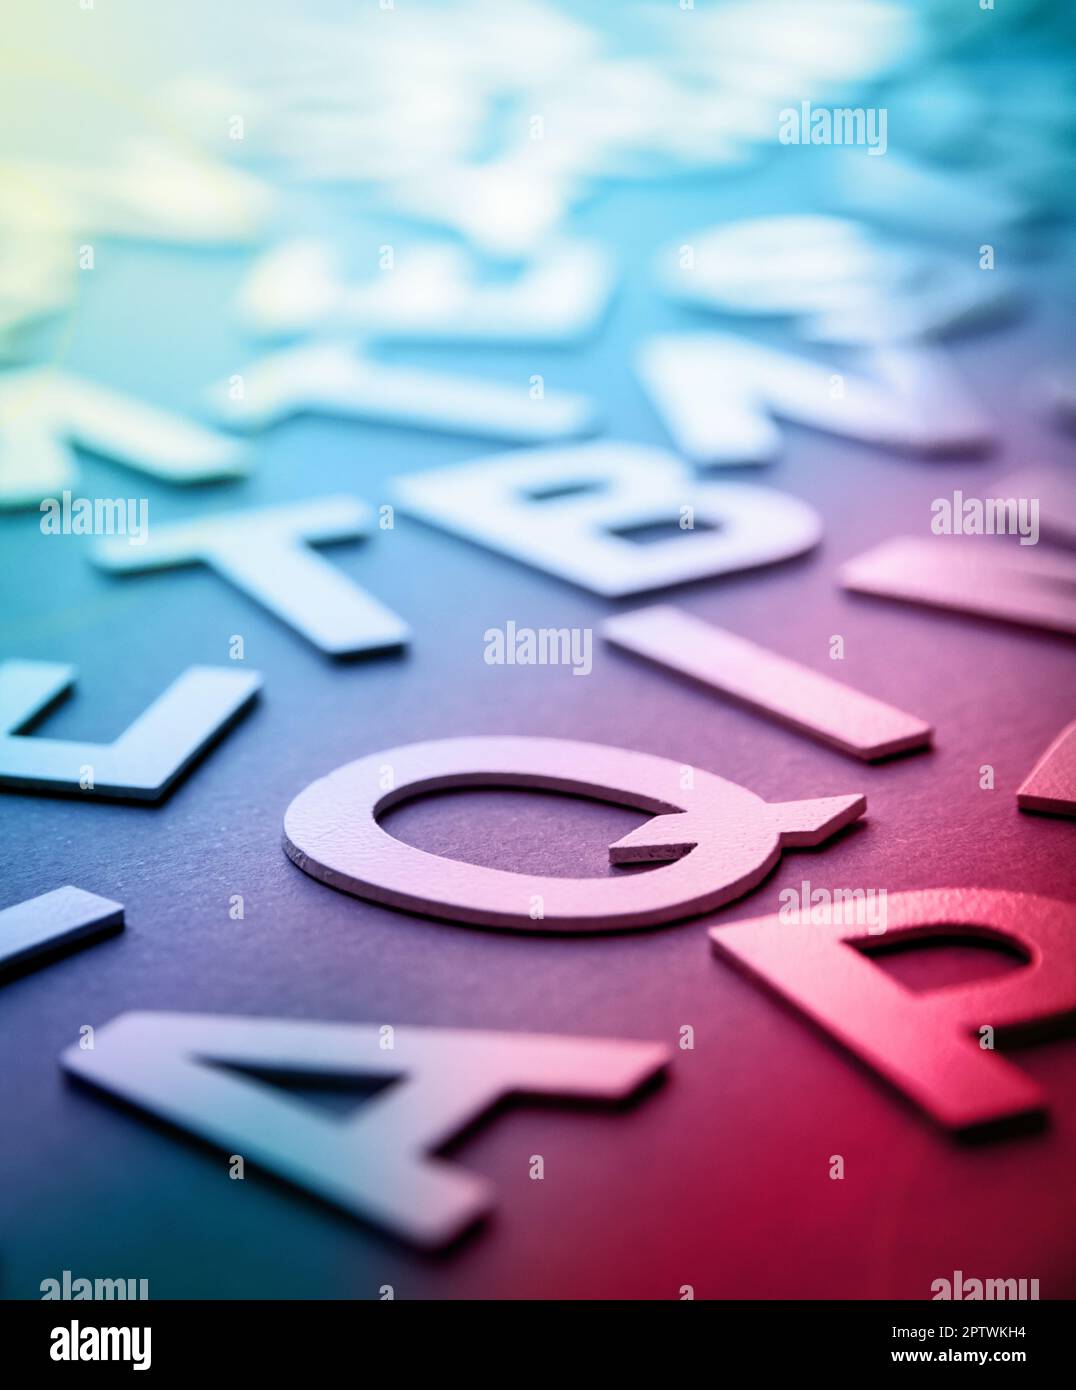 Mixed solid letters pile closeup photo. Education background concept Stock Photo